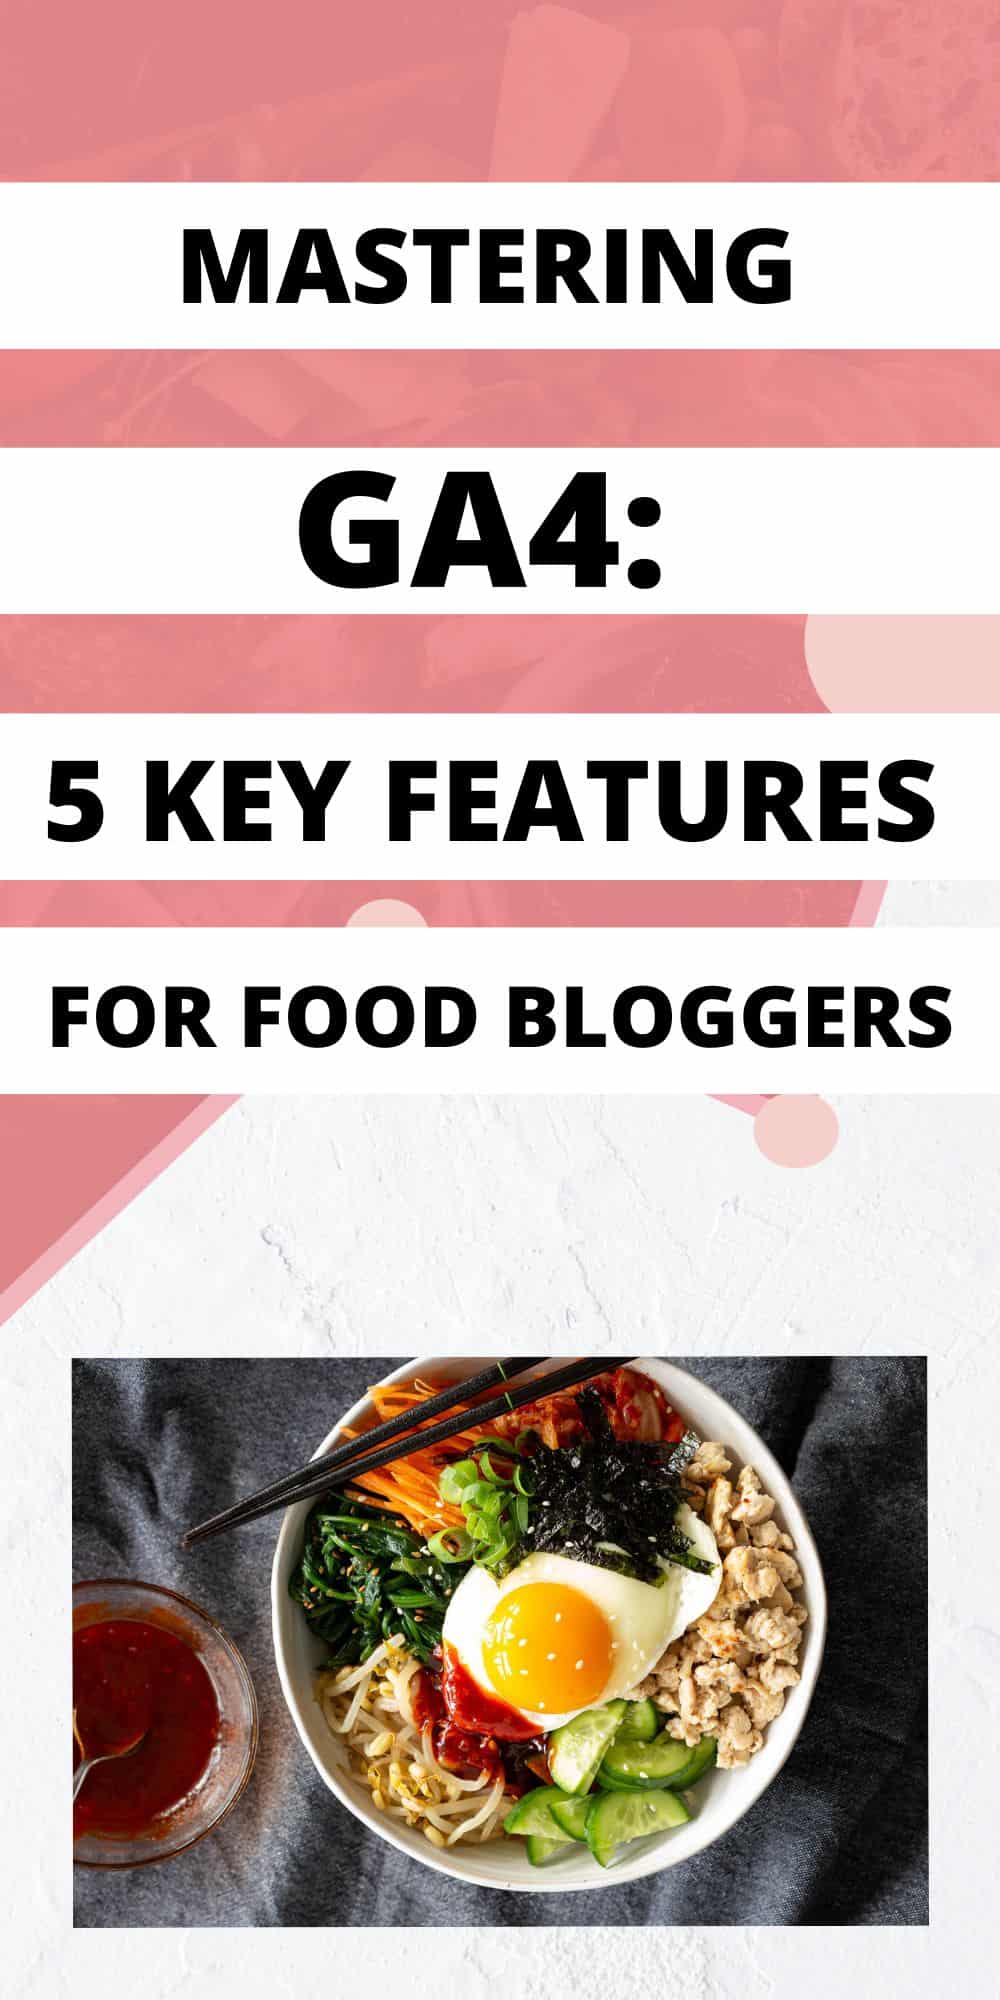 Mastering GA4: 5 Key Features Every Food Blogger Should Know